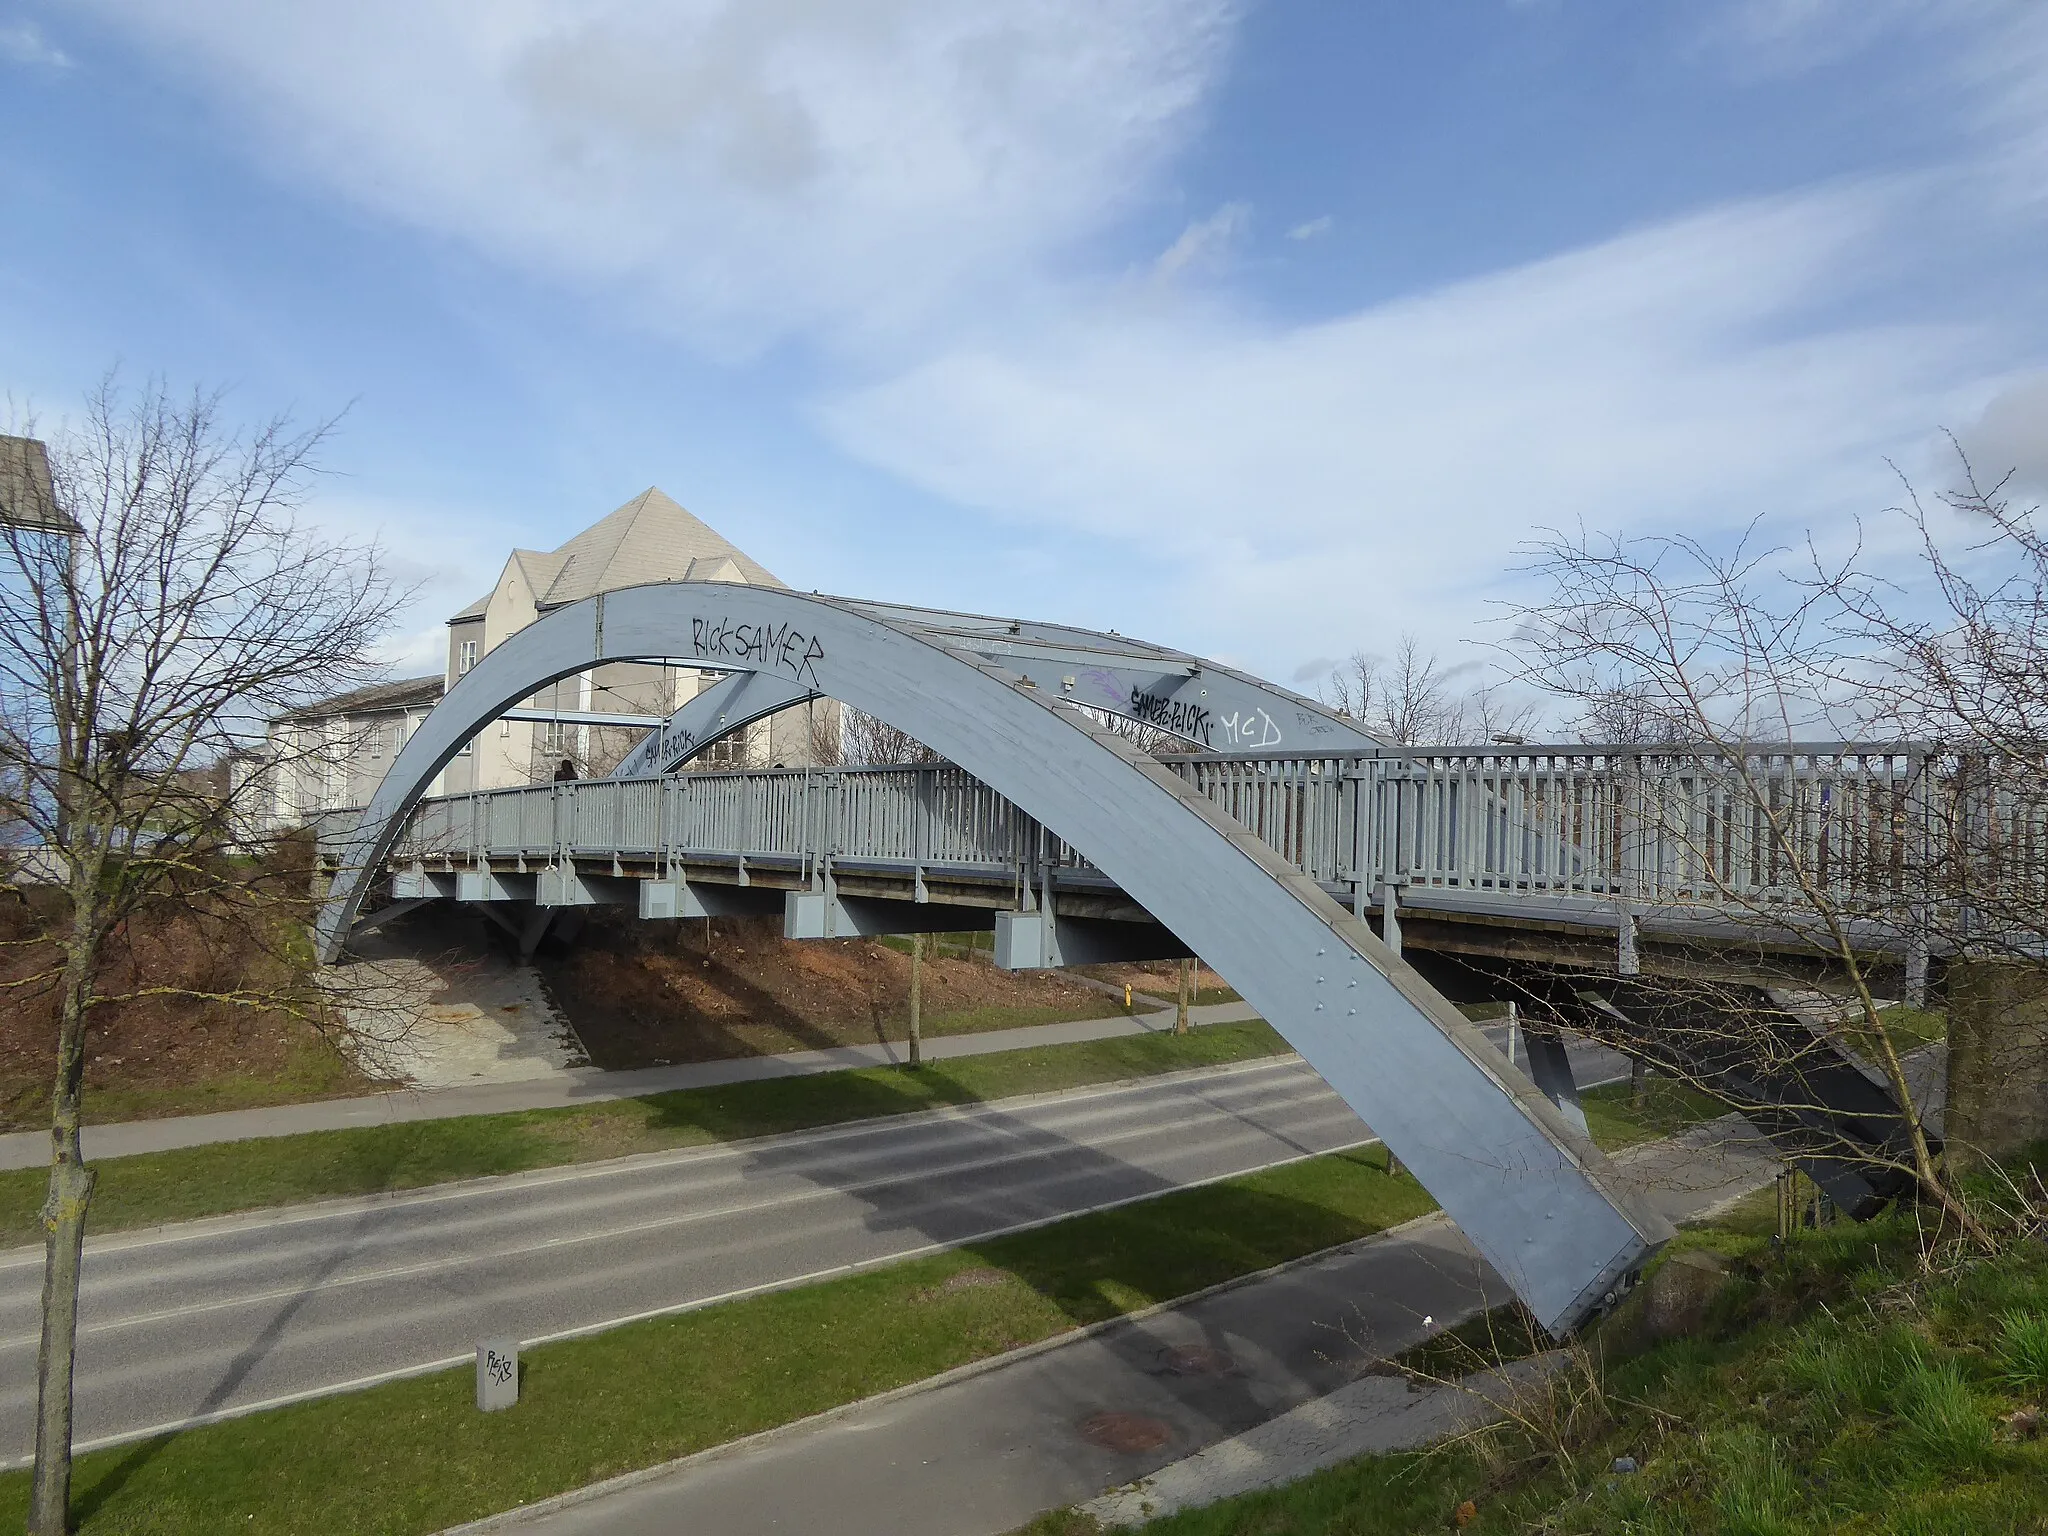 Photo showing: Footbridge over Trekroner Allé in Trekroner in Denmark. At 15 December 2020 it was hit by a truck with a crane and crashed down on the truck.